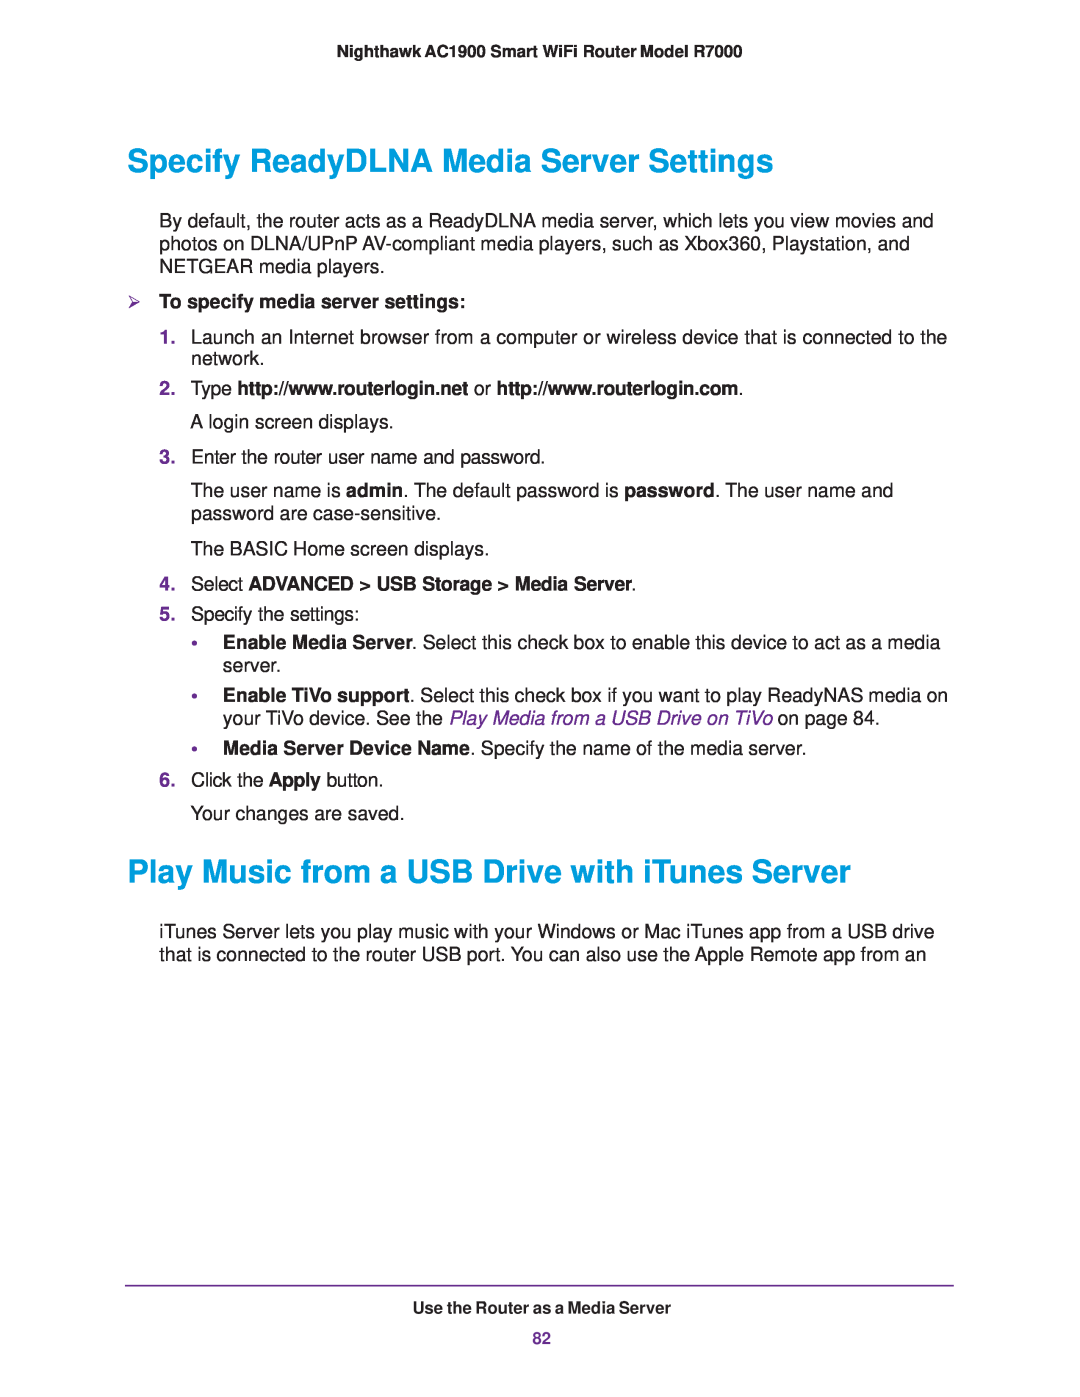 NETGEAR R7000 user manual Specify ReadyDLNA Media Server Settings, Play Music from a USB Drive with iTunes Server 